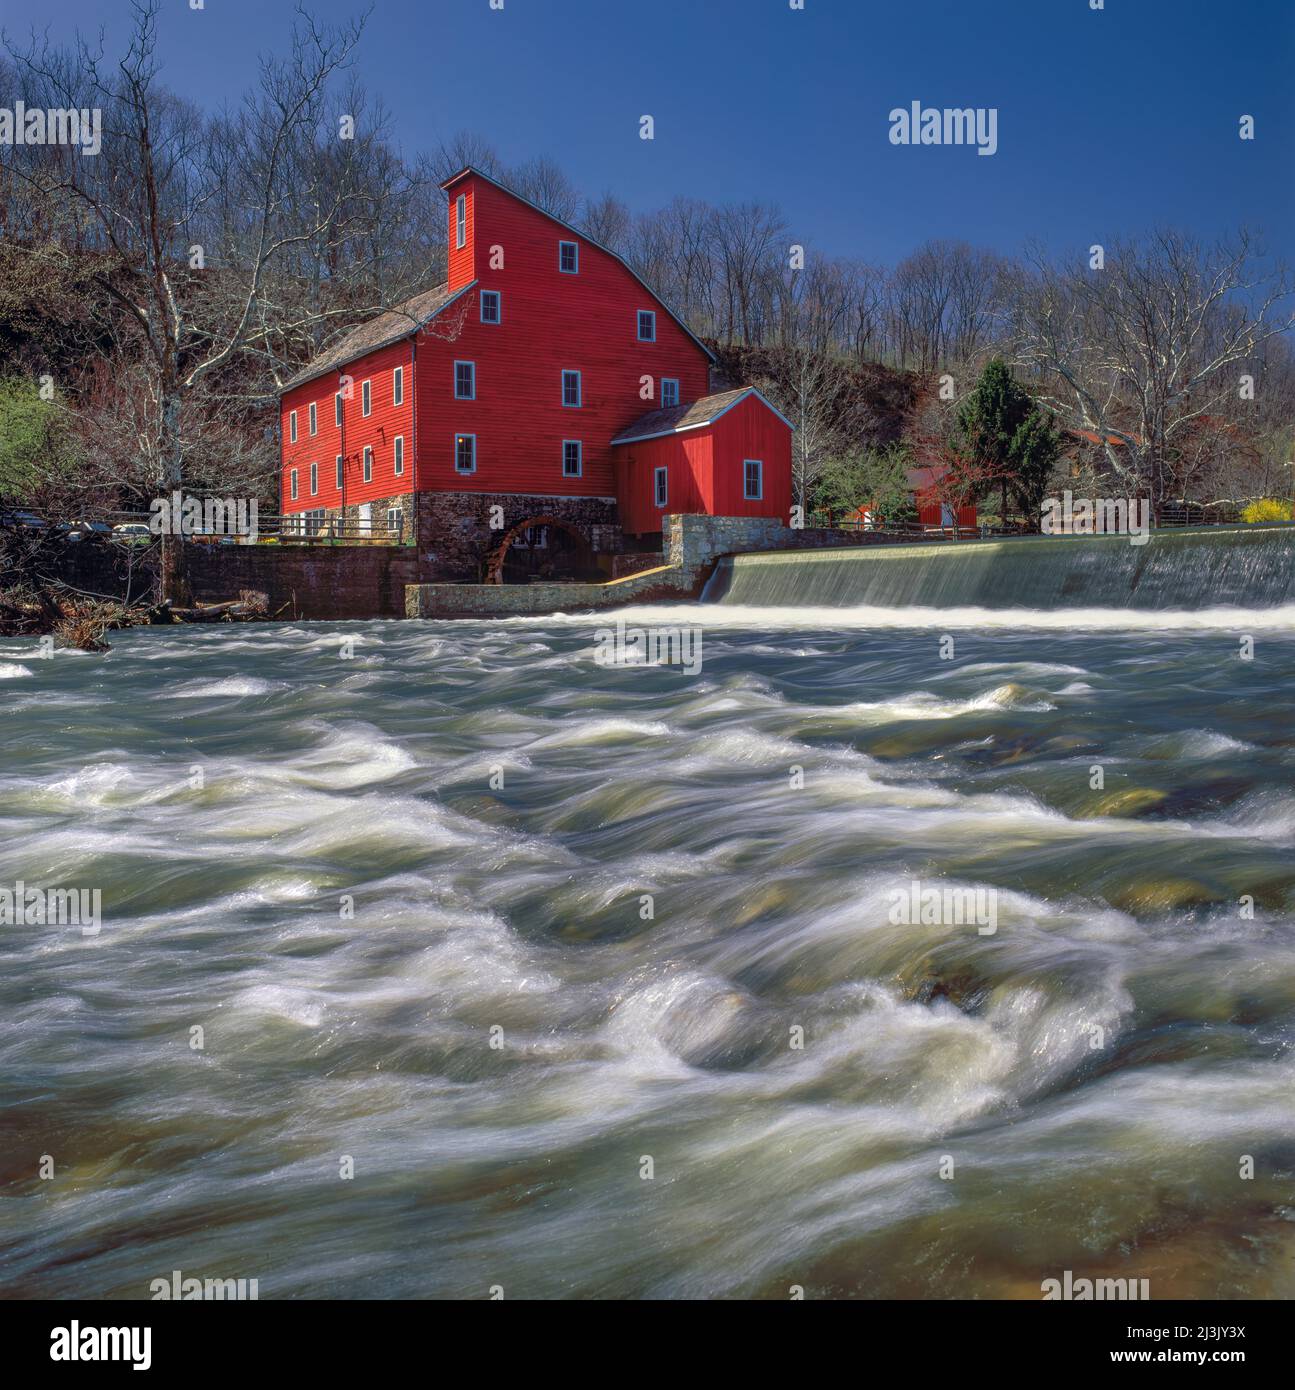 The Old Mill, Clinton, New Jersey Stock Photo